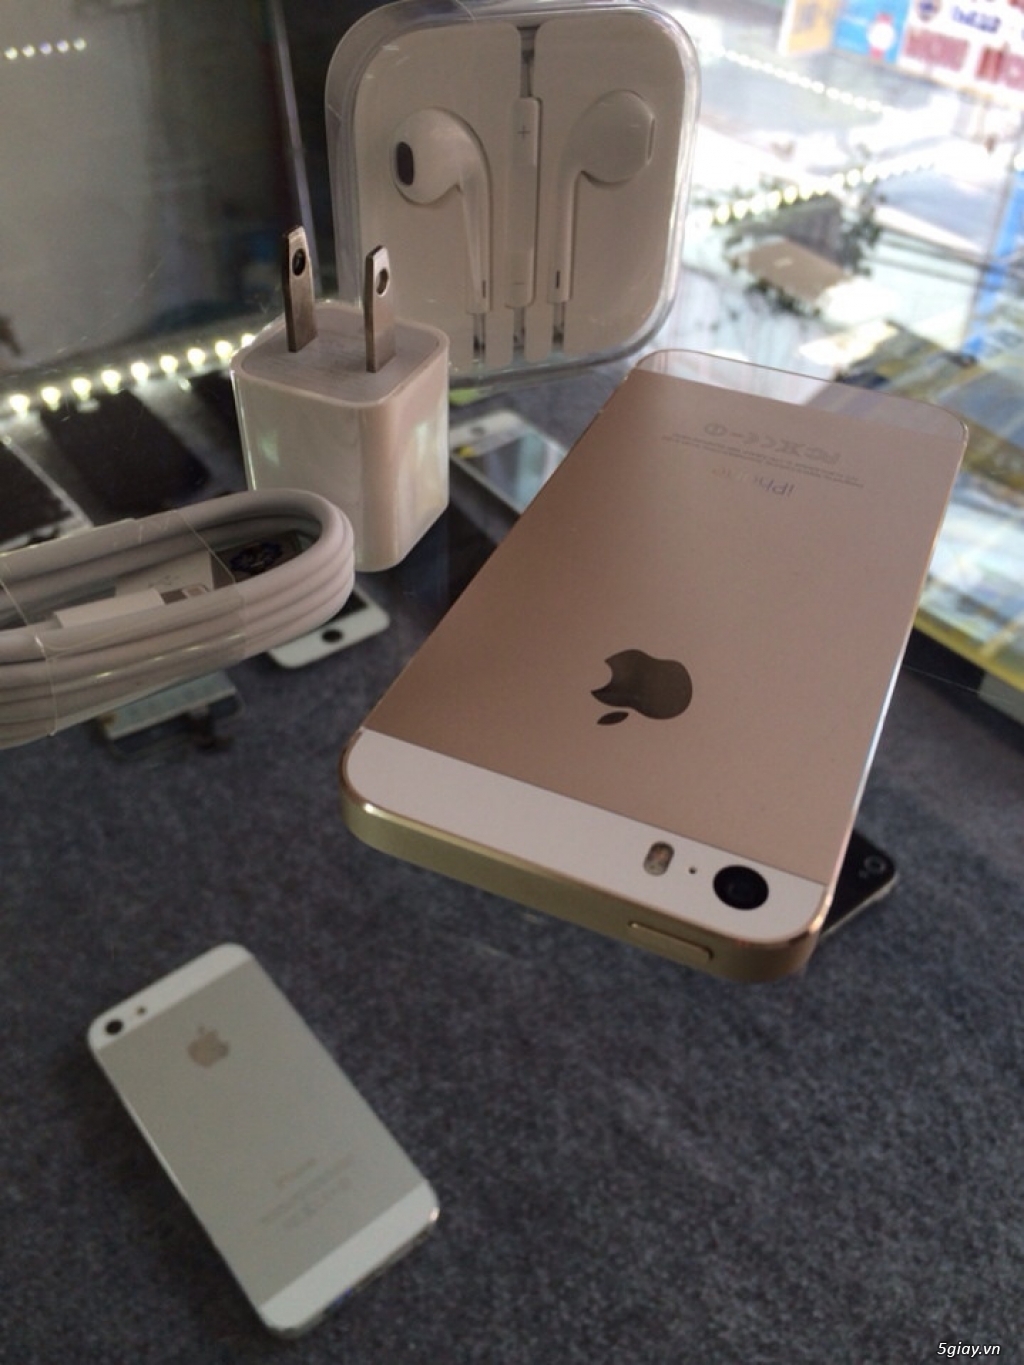 iphone 5s 32G gold quốc tế.